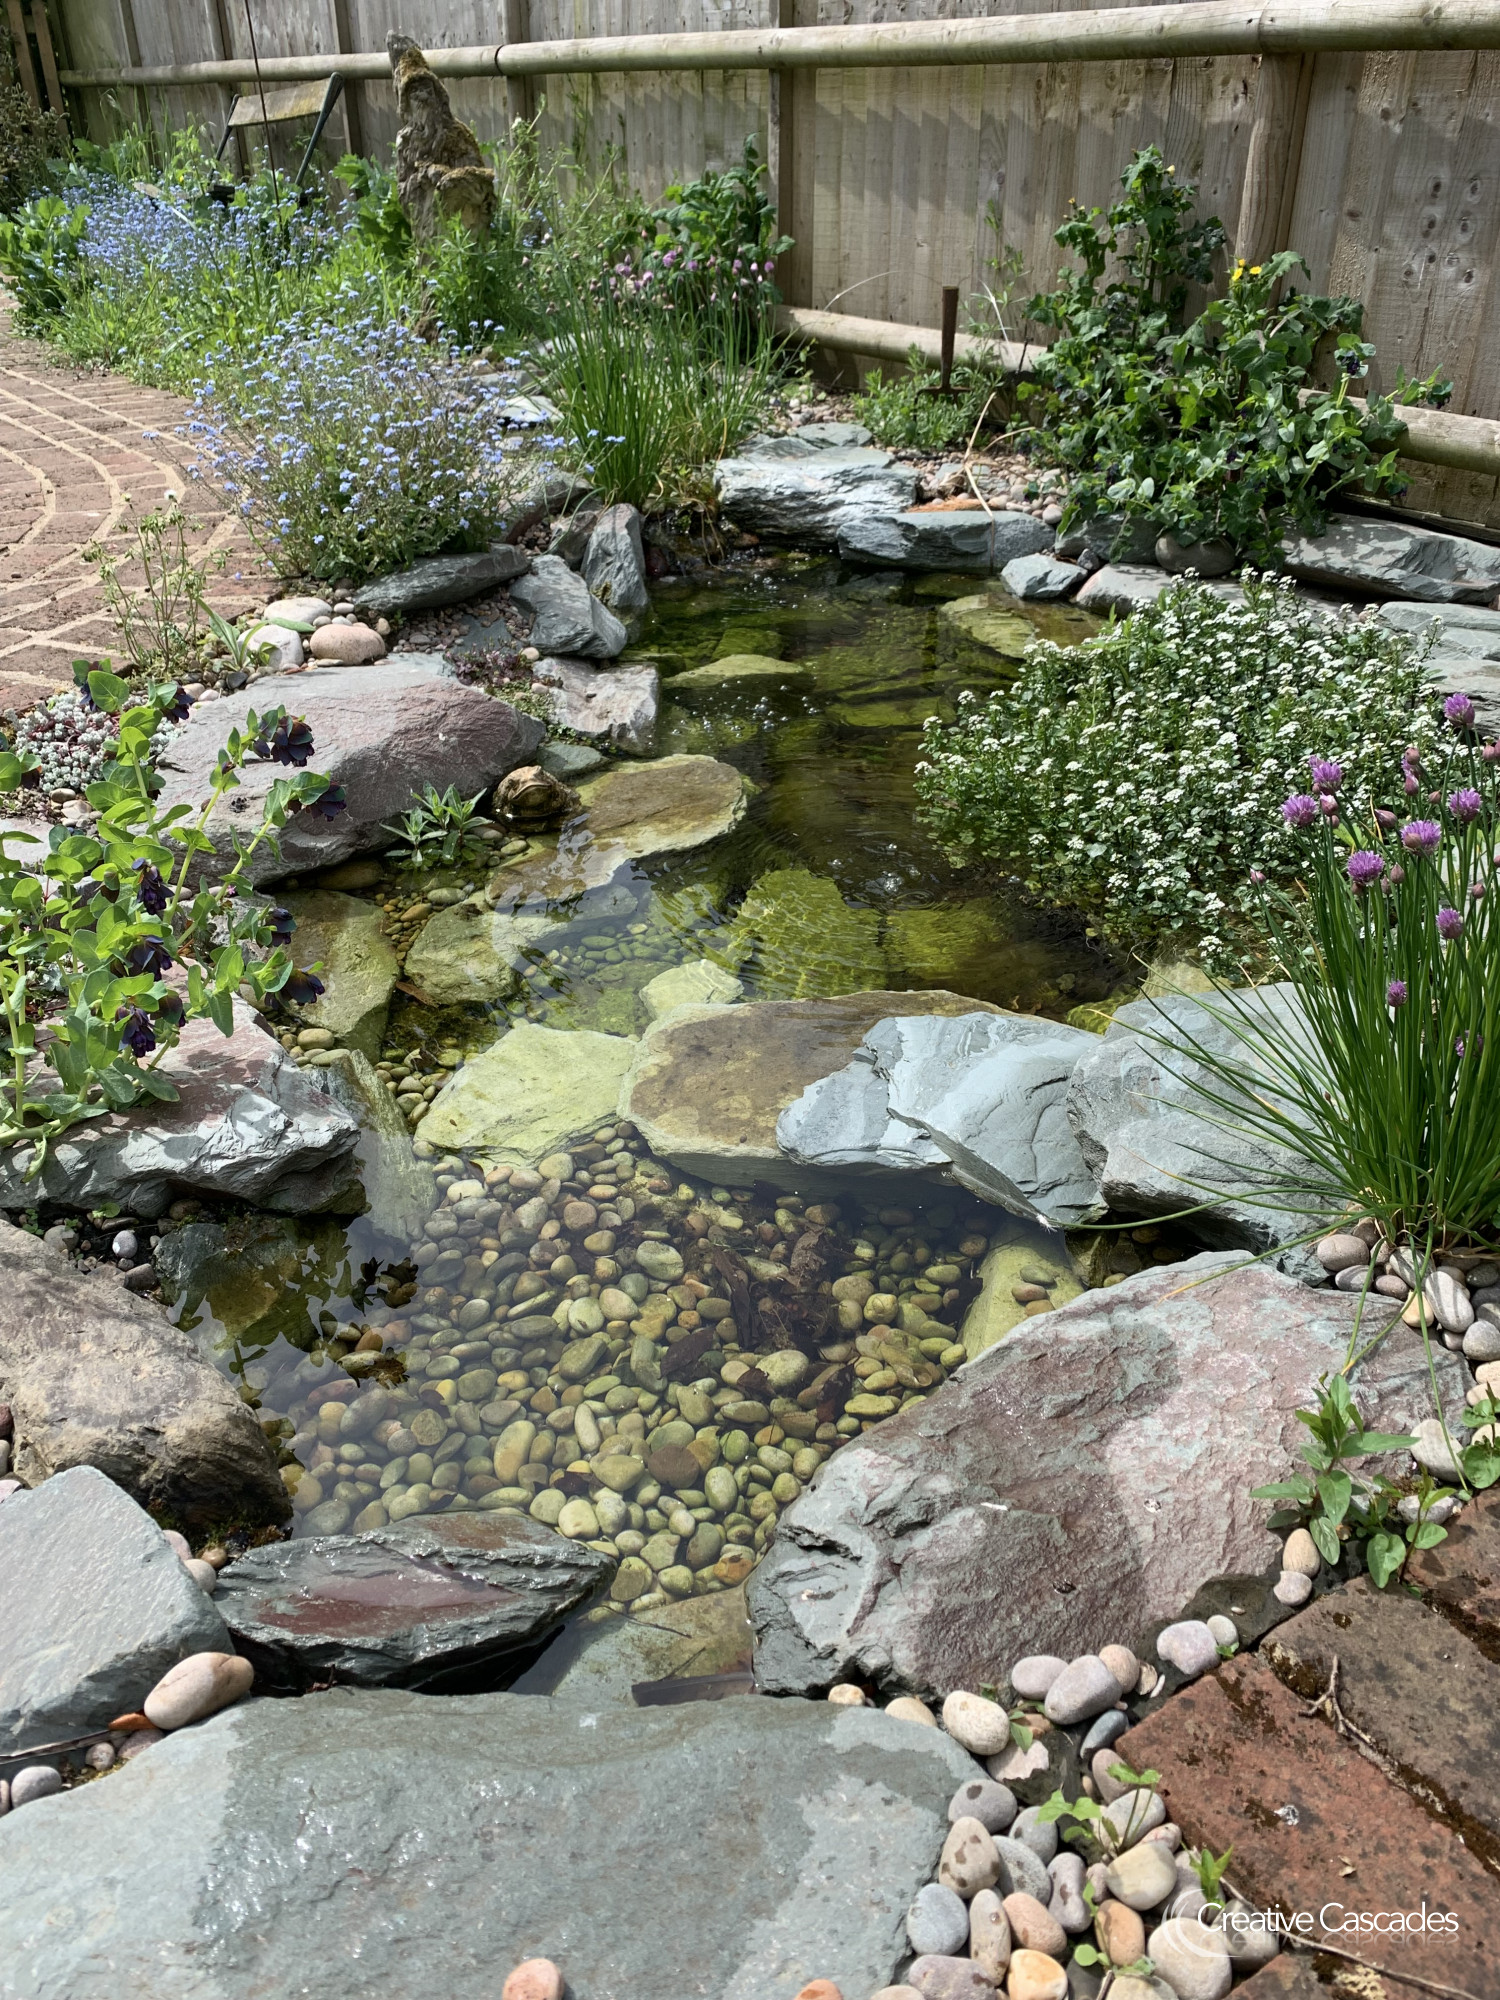 A year-on when planting is softening the rocky aesthetic..  - Landscaping and Water Features -  Creative Cascades